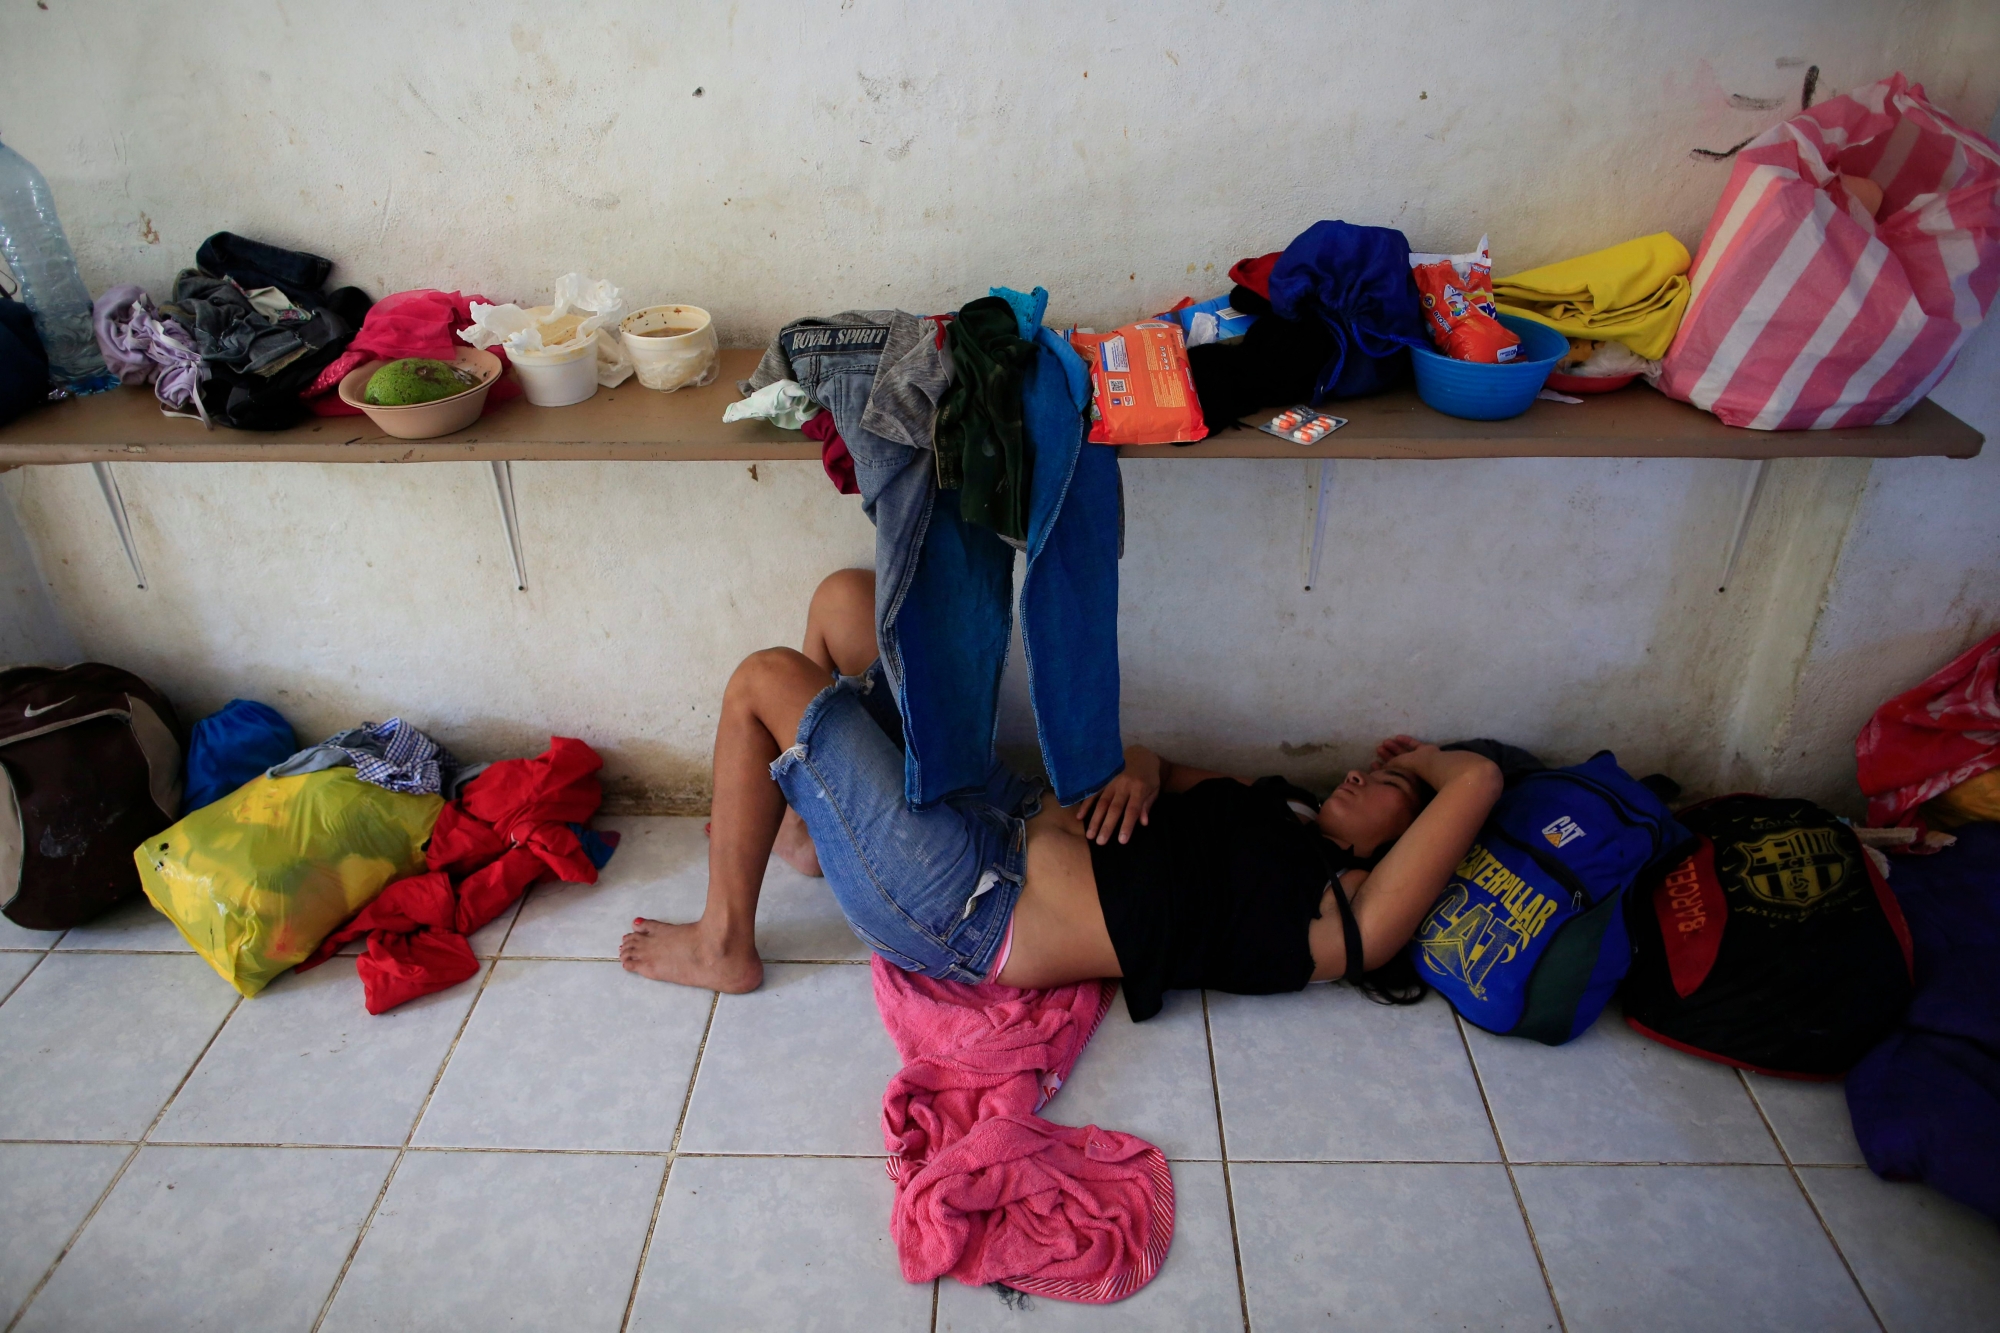 A woman naps on the tile floor of a room converted into a dormitory at the Good Shepherd migrant shelter in Tapachula, Mexico, Tuesday, June 18, 2019. Mexico's ramped-up effort to curb the flow of Central American migrants to the United States so far hasn't eased the burden on the dozens of independent humanitarian shelters like Good Shepherd that are scattered along migration routes through the country. (AP Photo/Rebecca Blackwell) Mexico Immigration